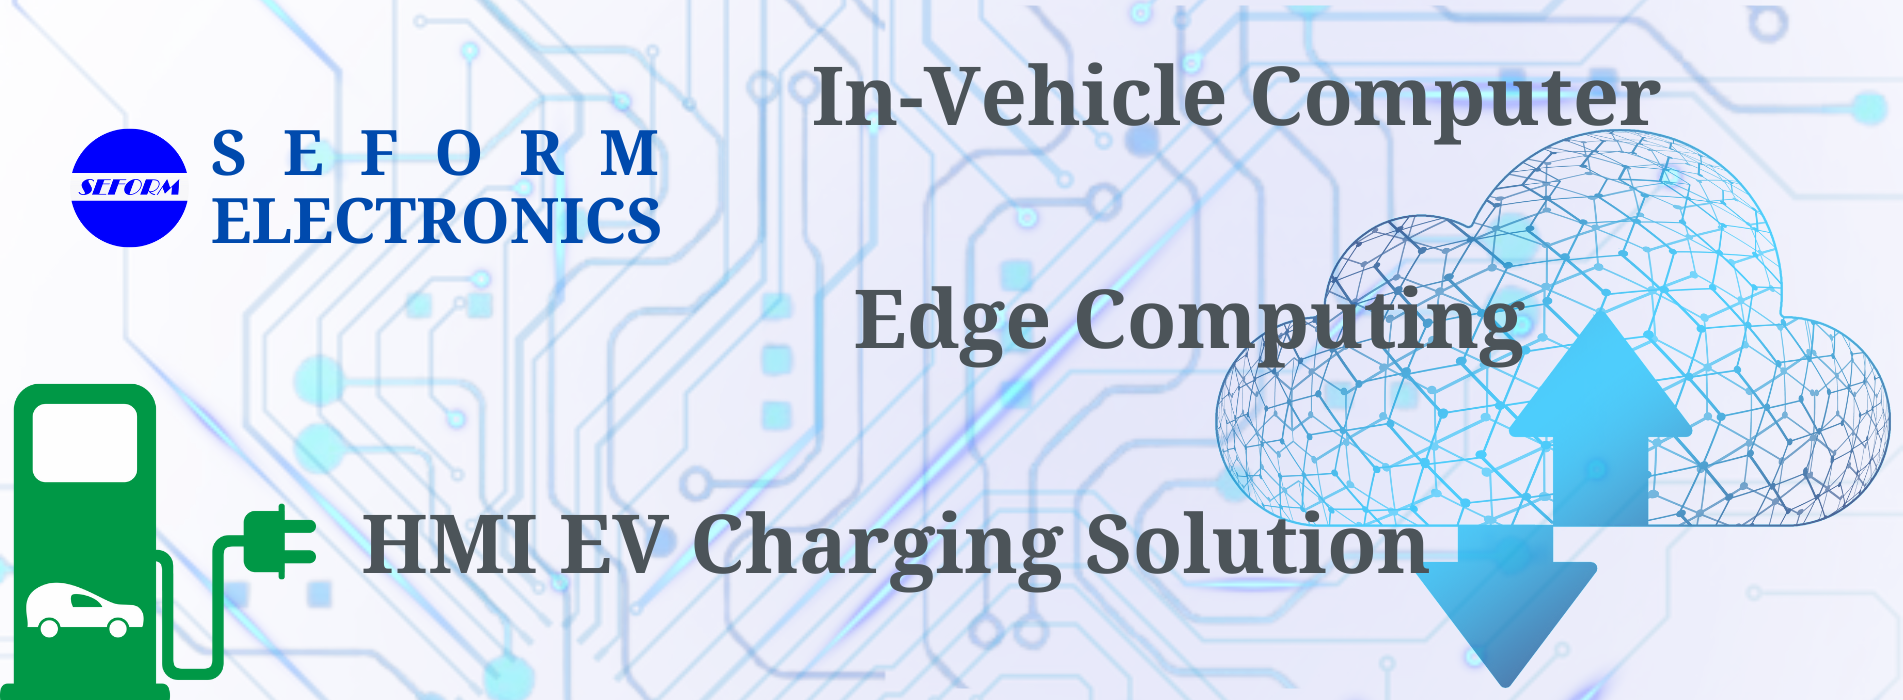 SEFORM ELECTRONICS' new products include in-vehicle computer, edge computing, industrial touch monitor and HMI EV Charging Solution